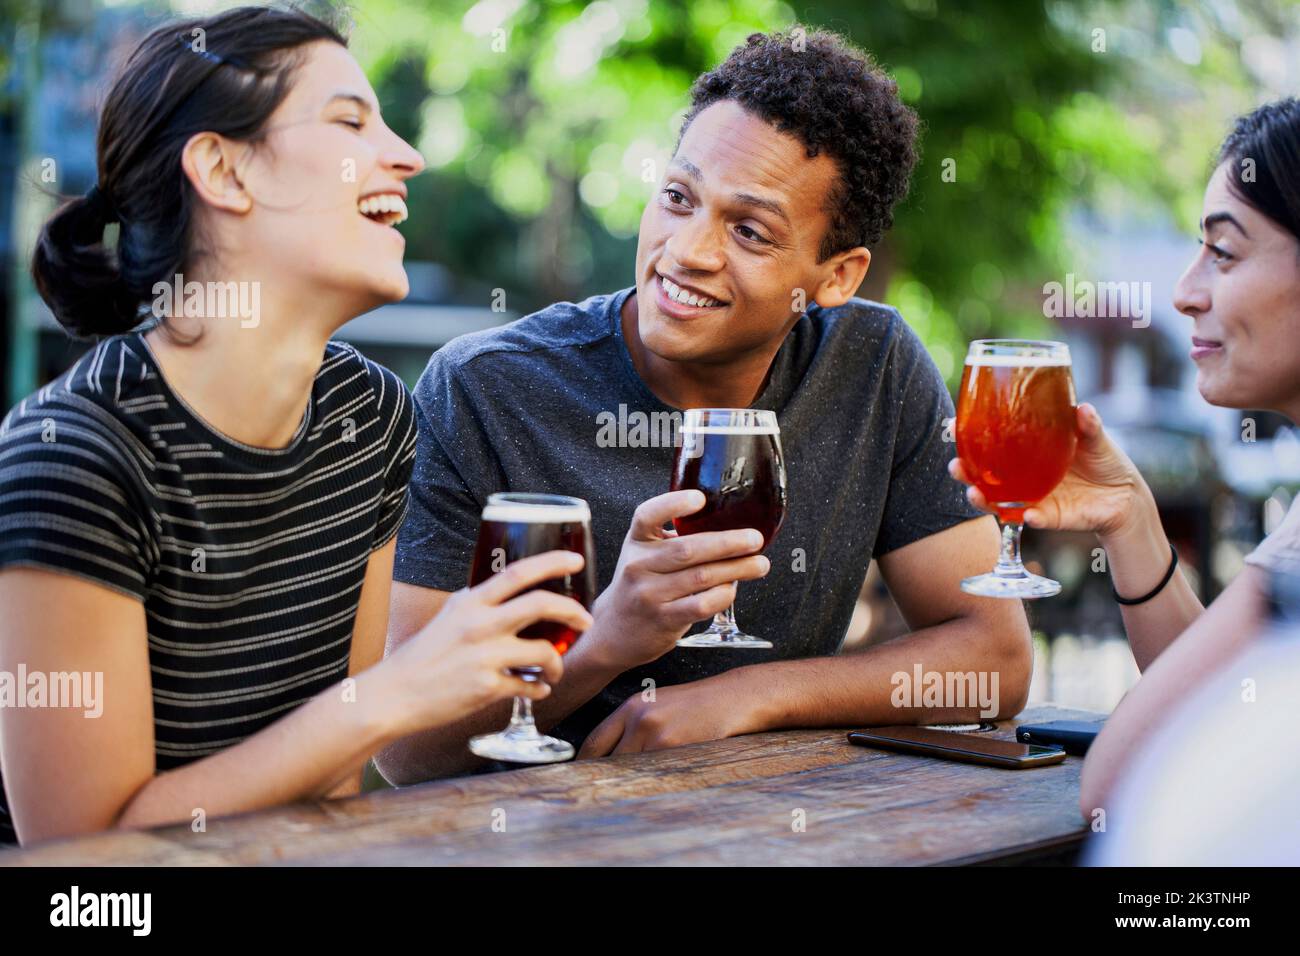 Young Latin American man drinking beer with female friends Stock Photo